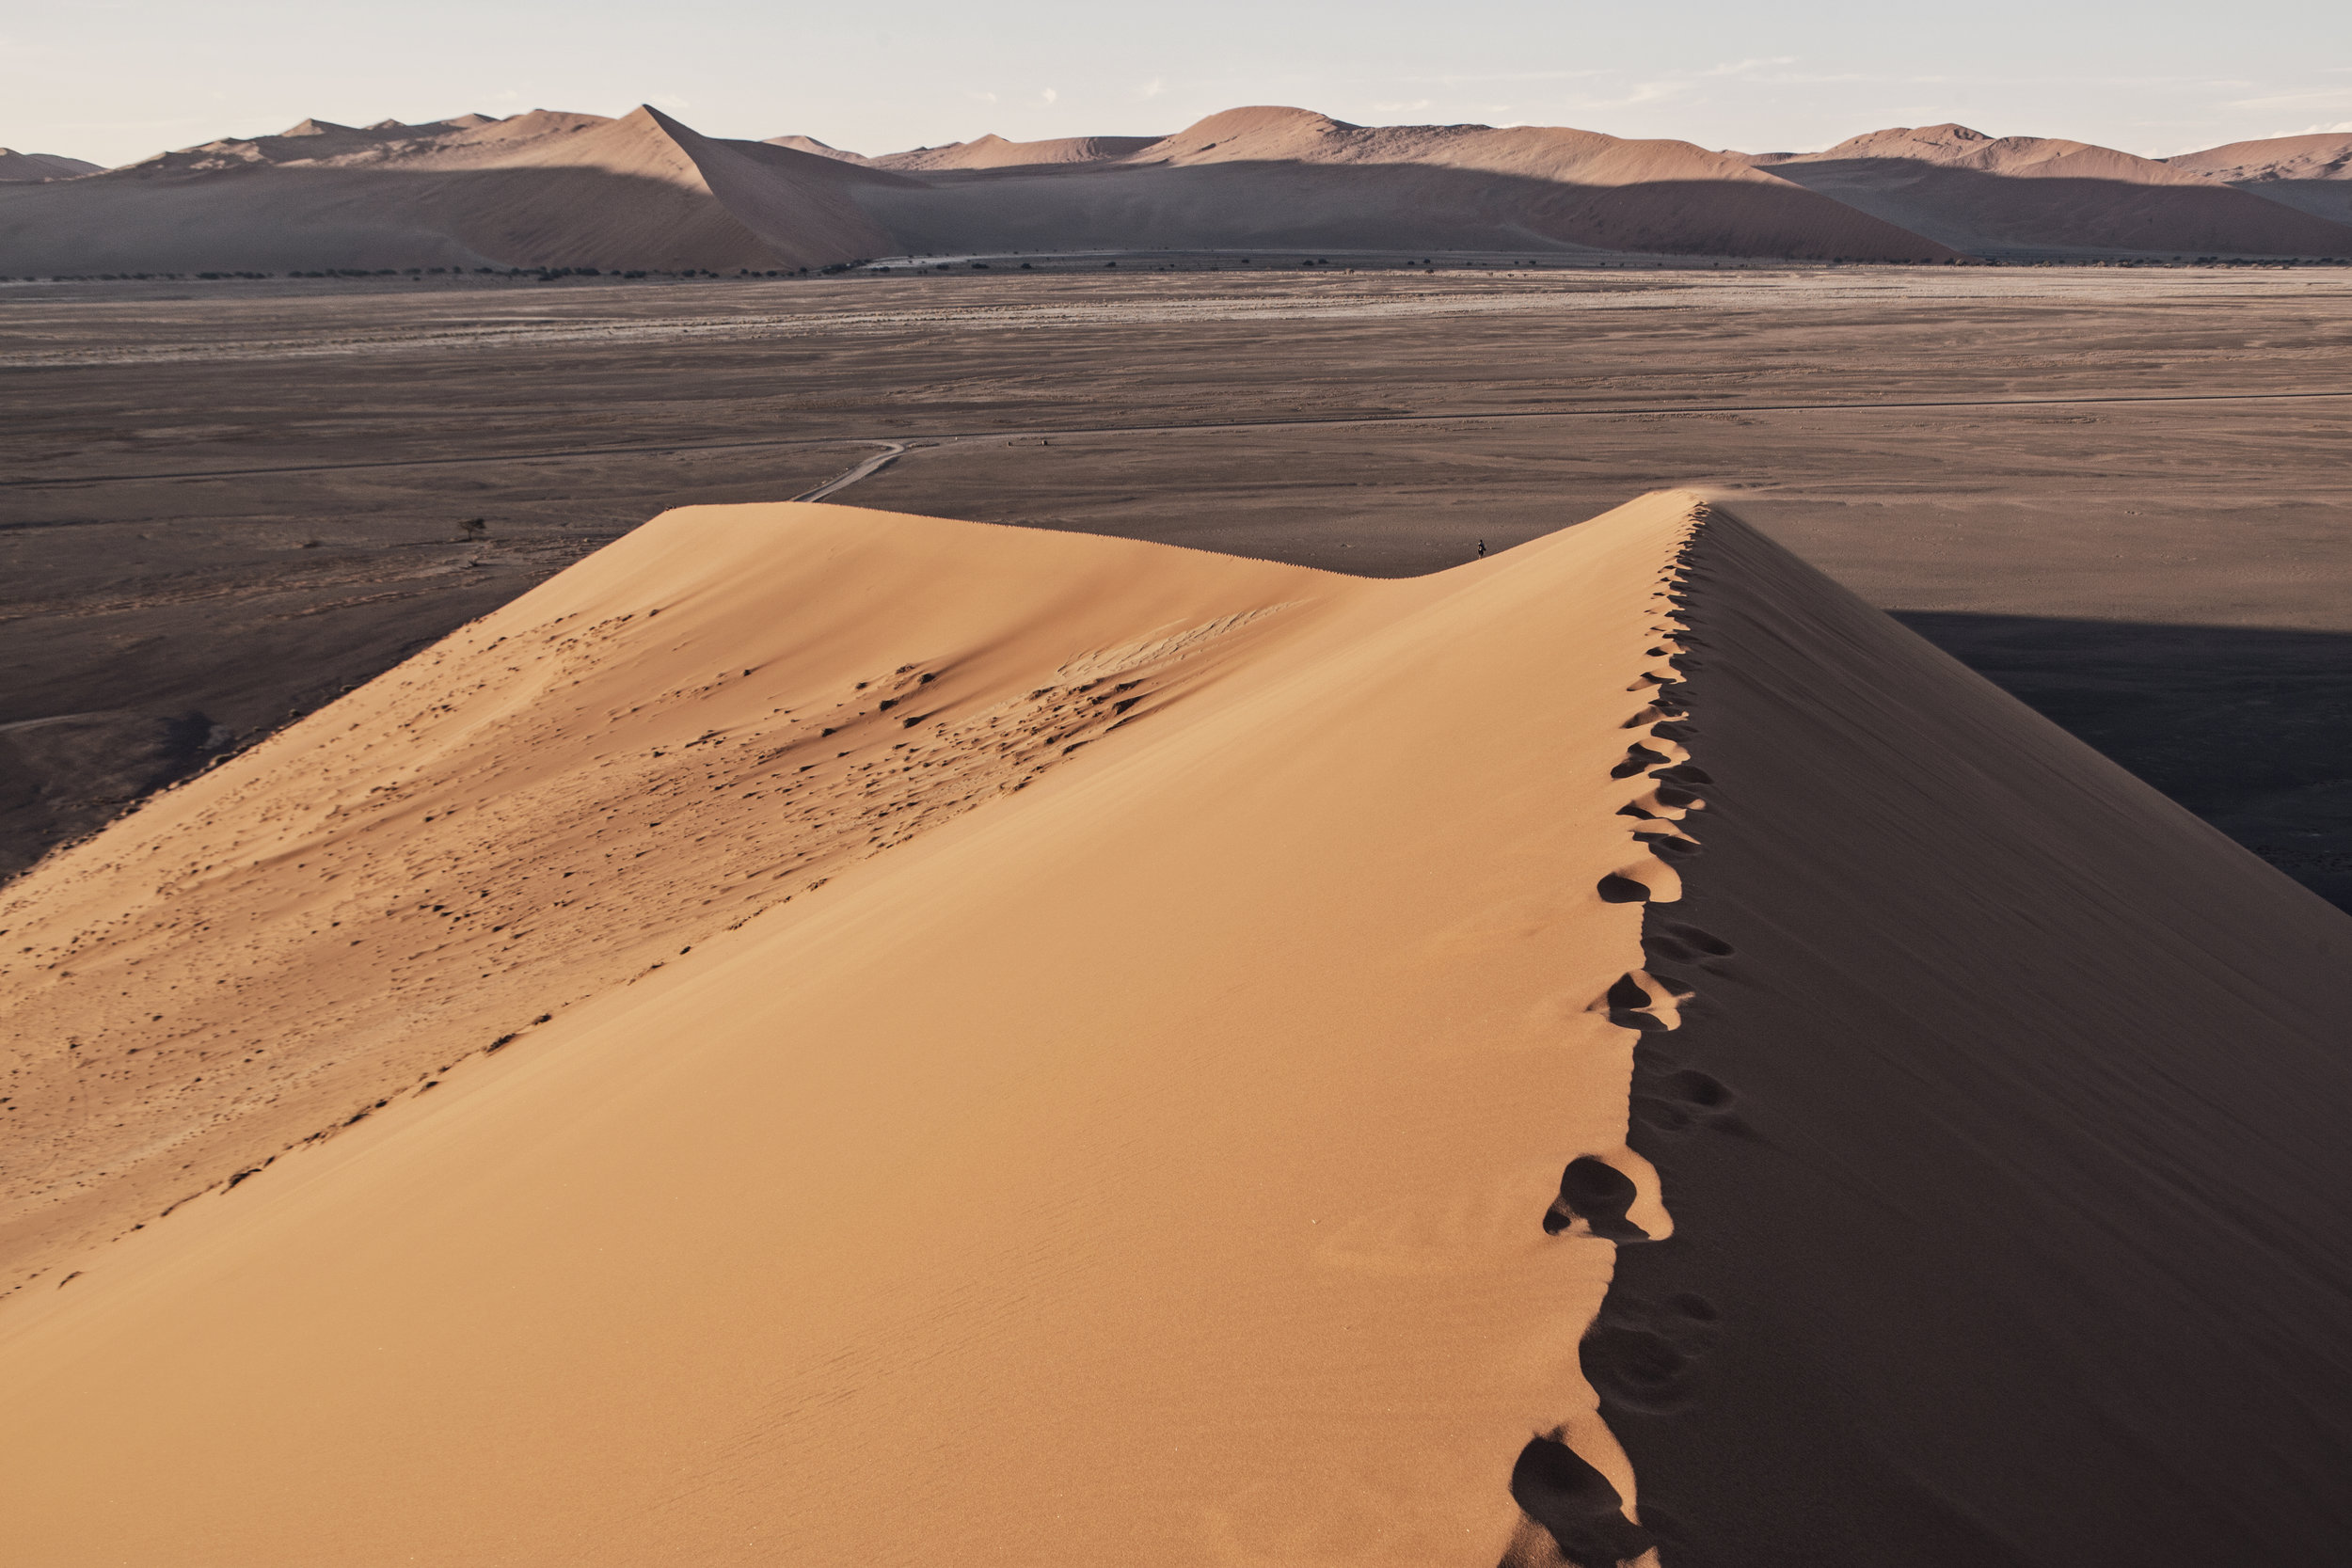  The view from one of the tallest sand dunes on Earth, Namibia. 